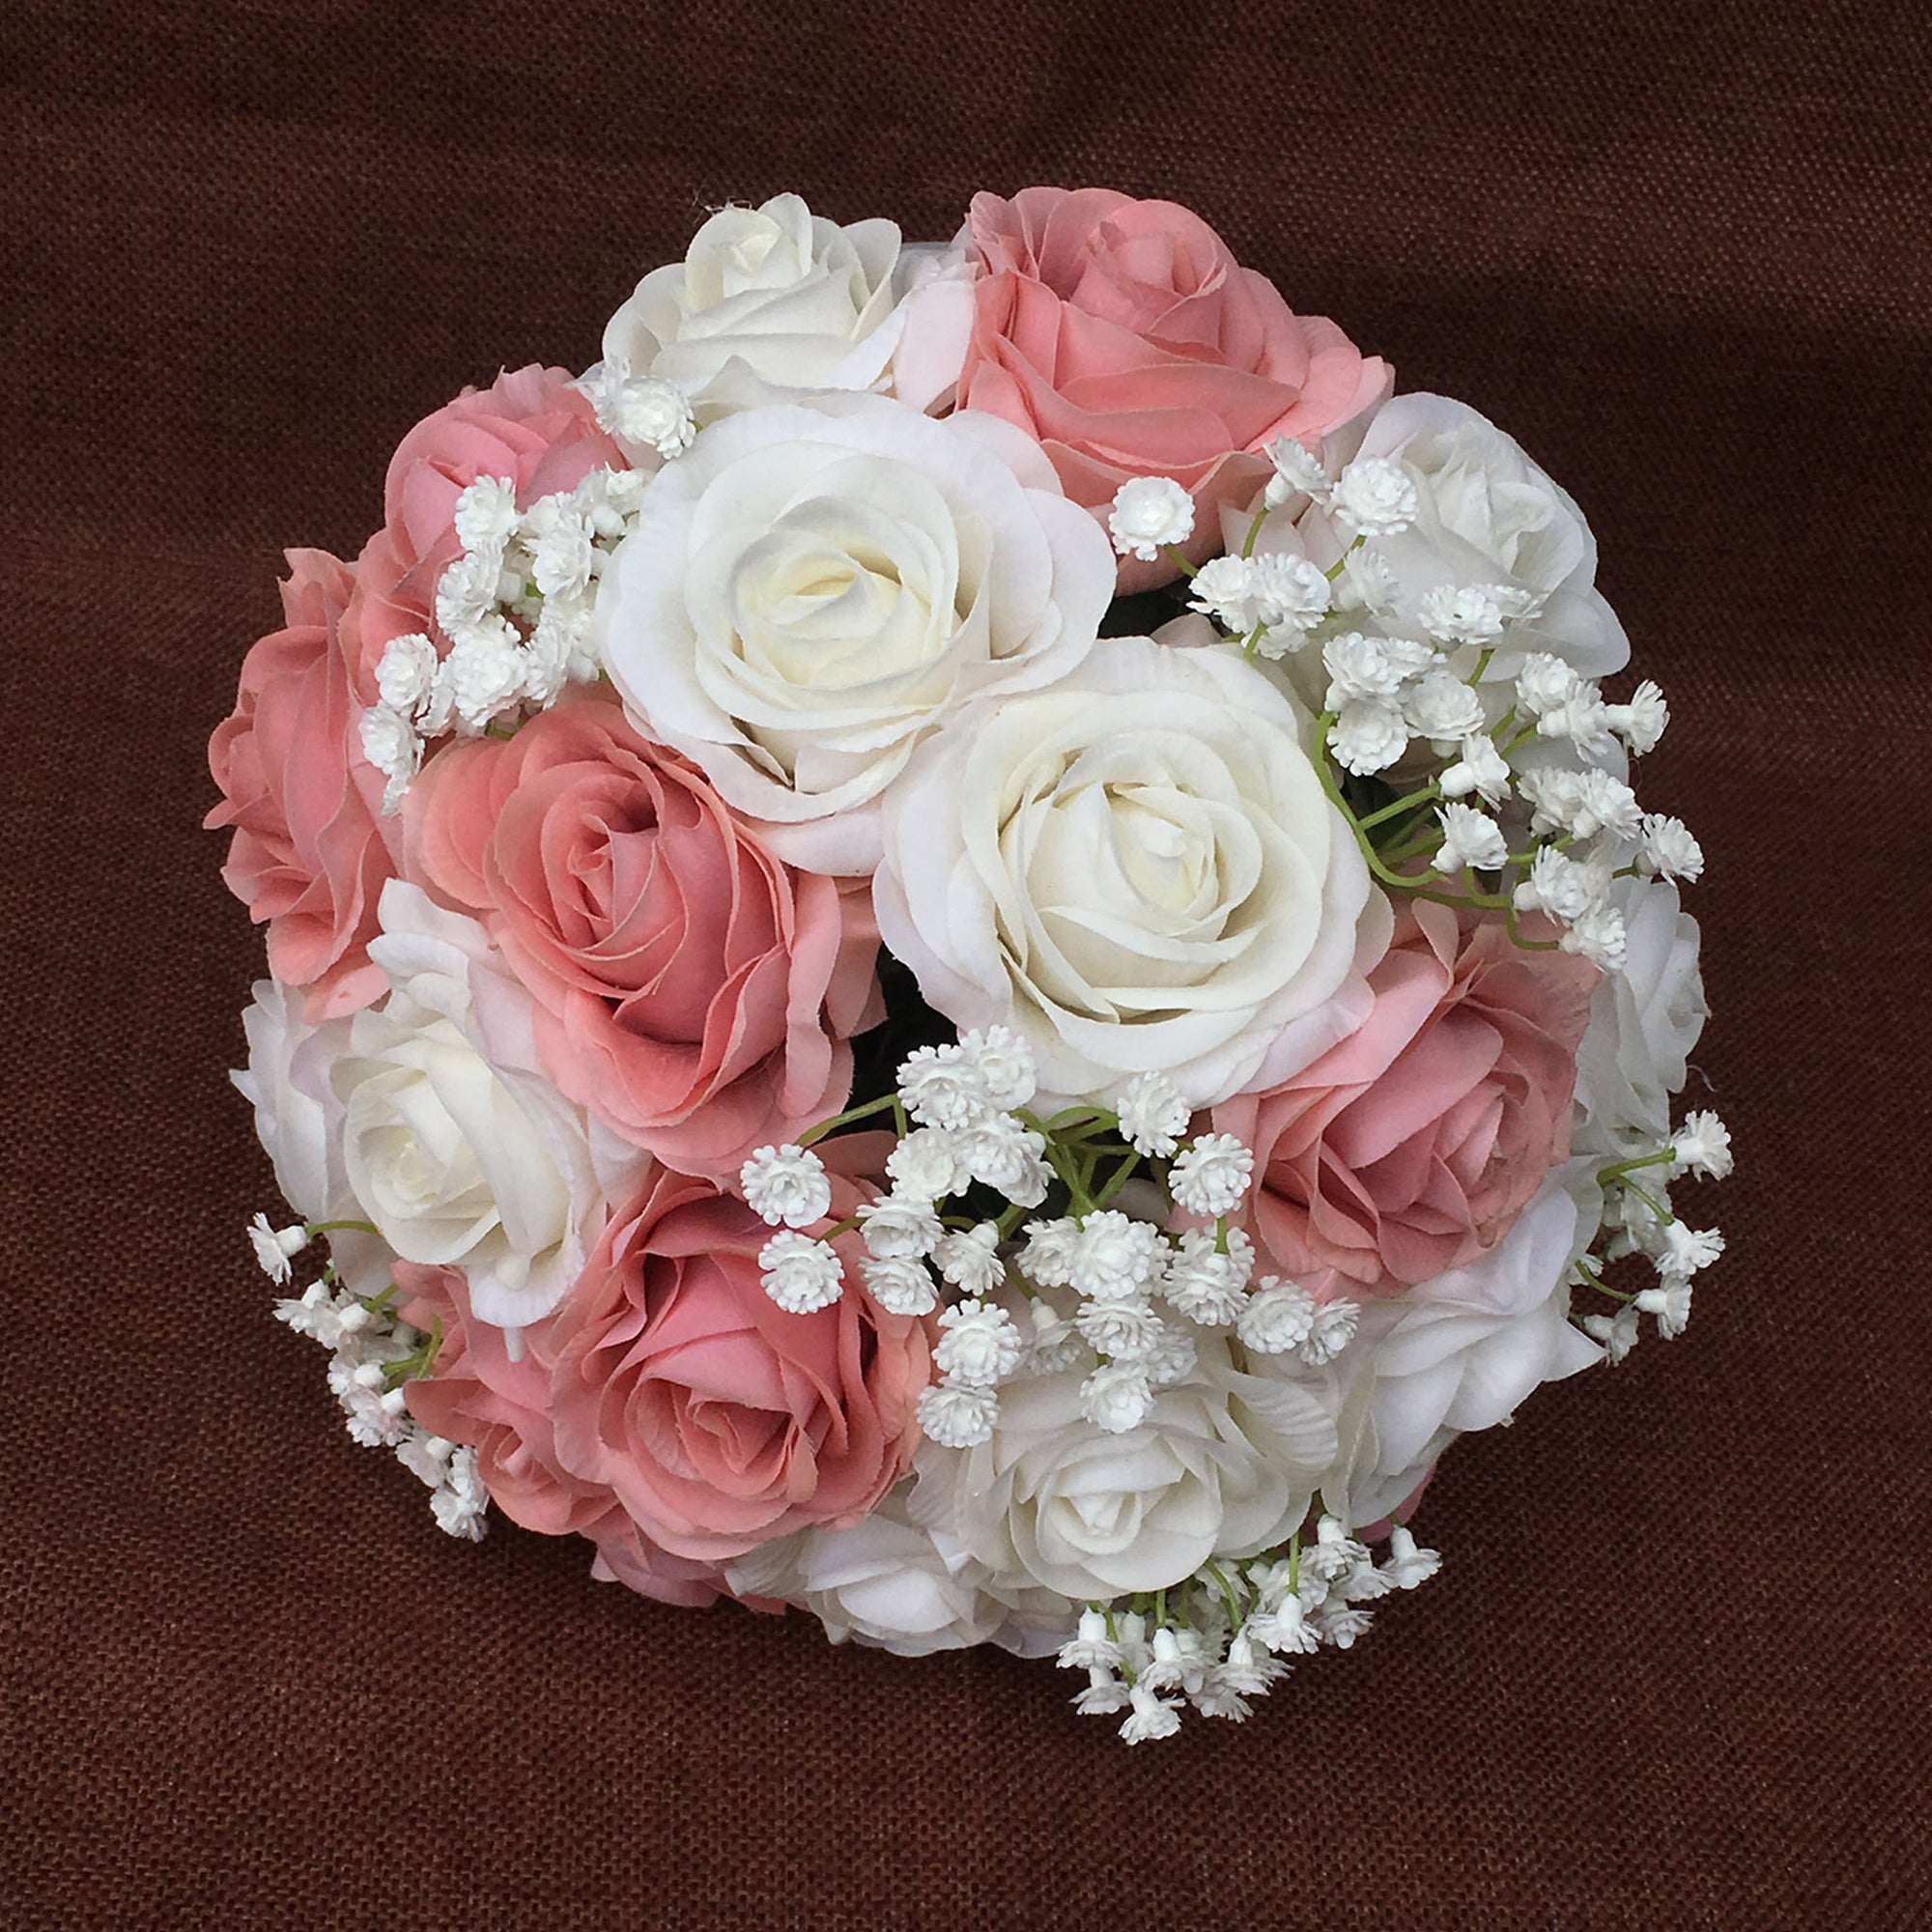 Dusty Rose and White Wedding Bouquet with Babysreahth